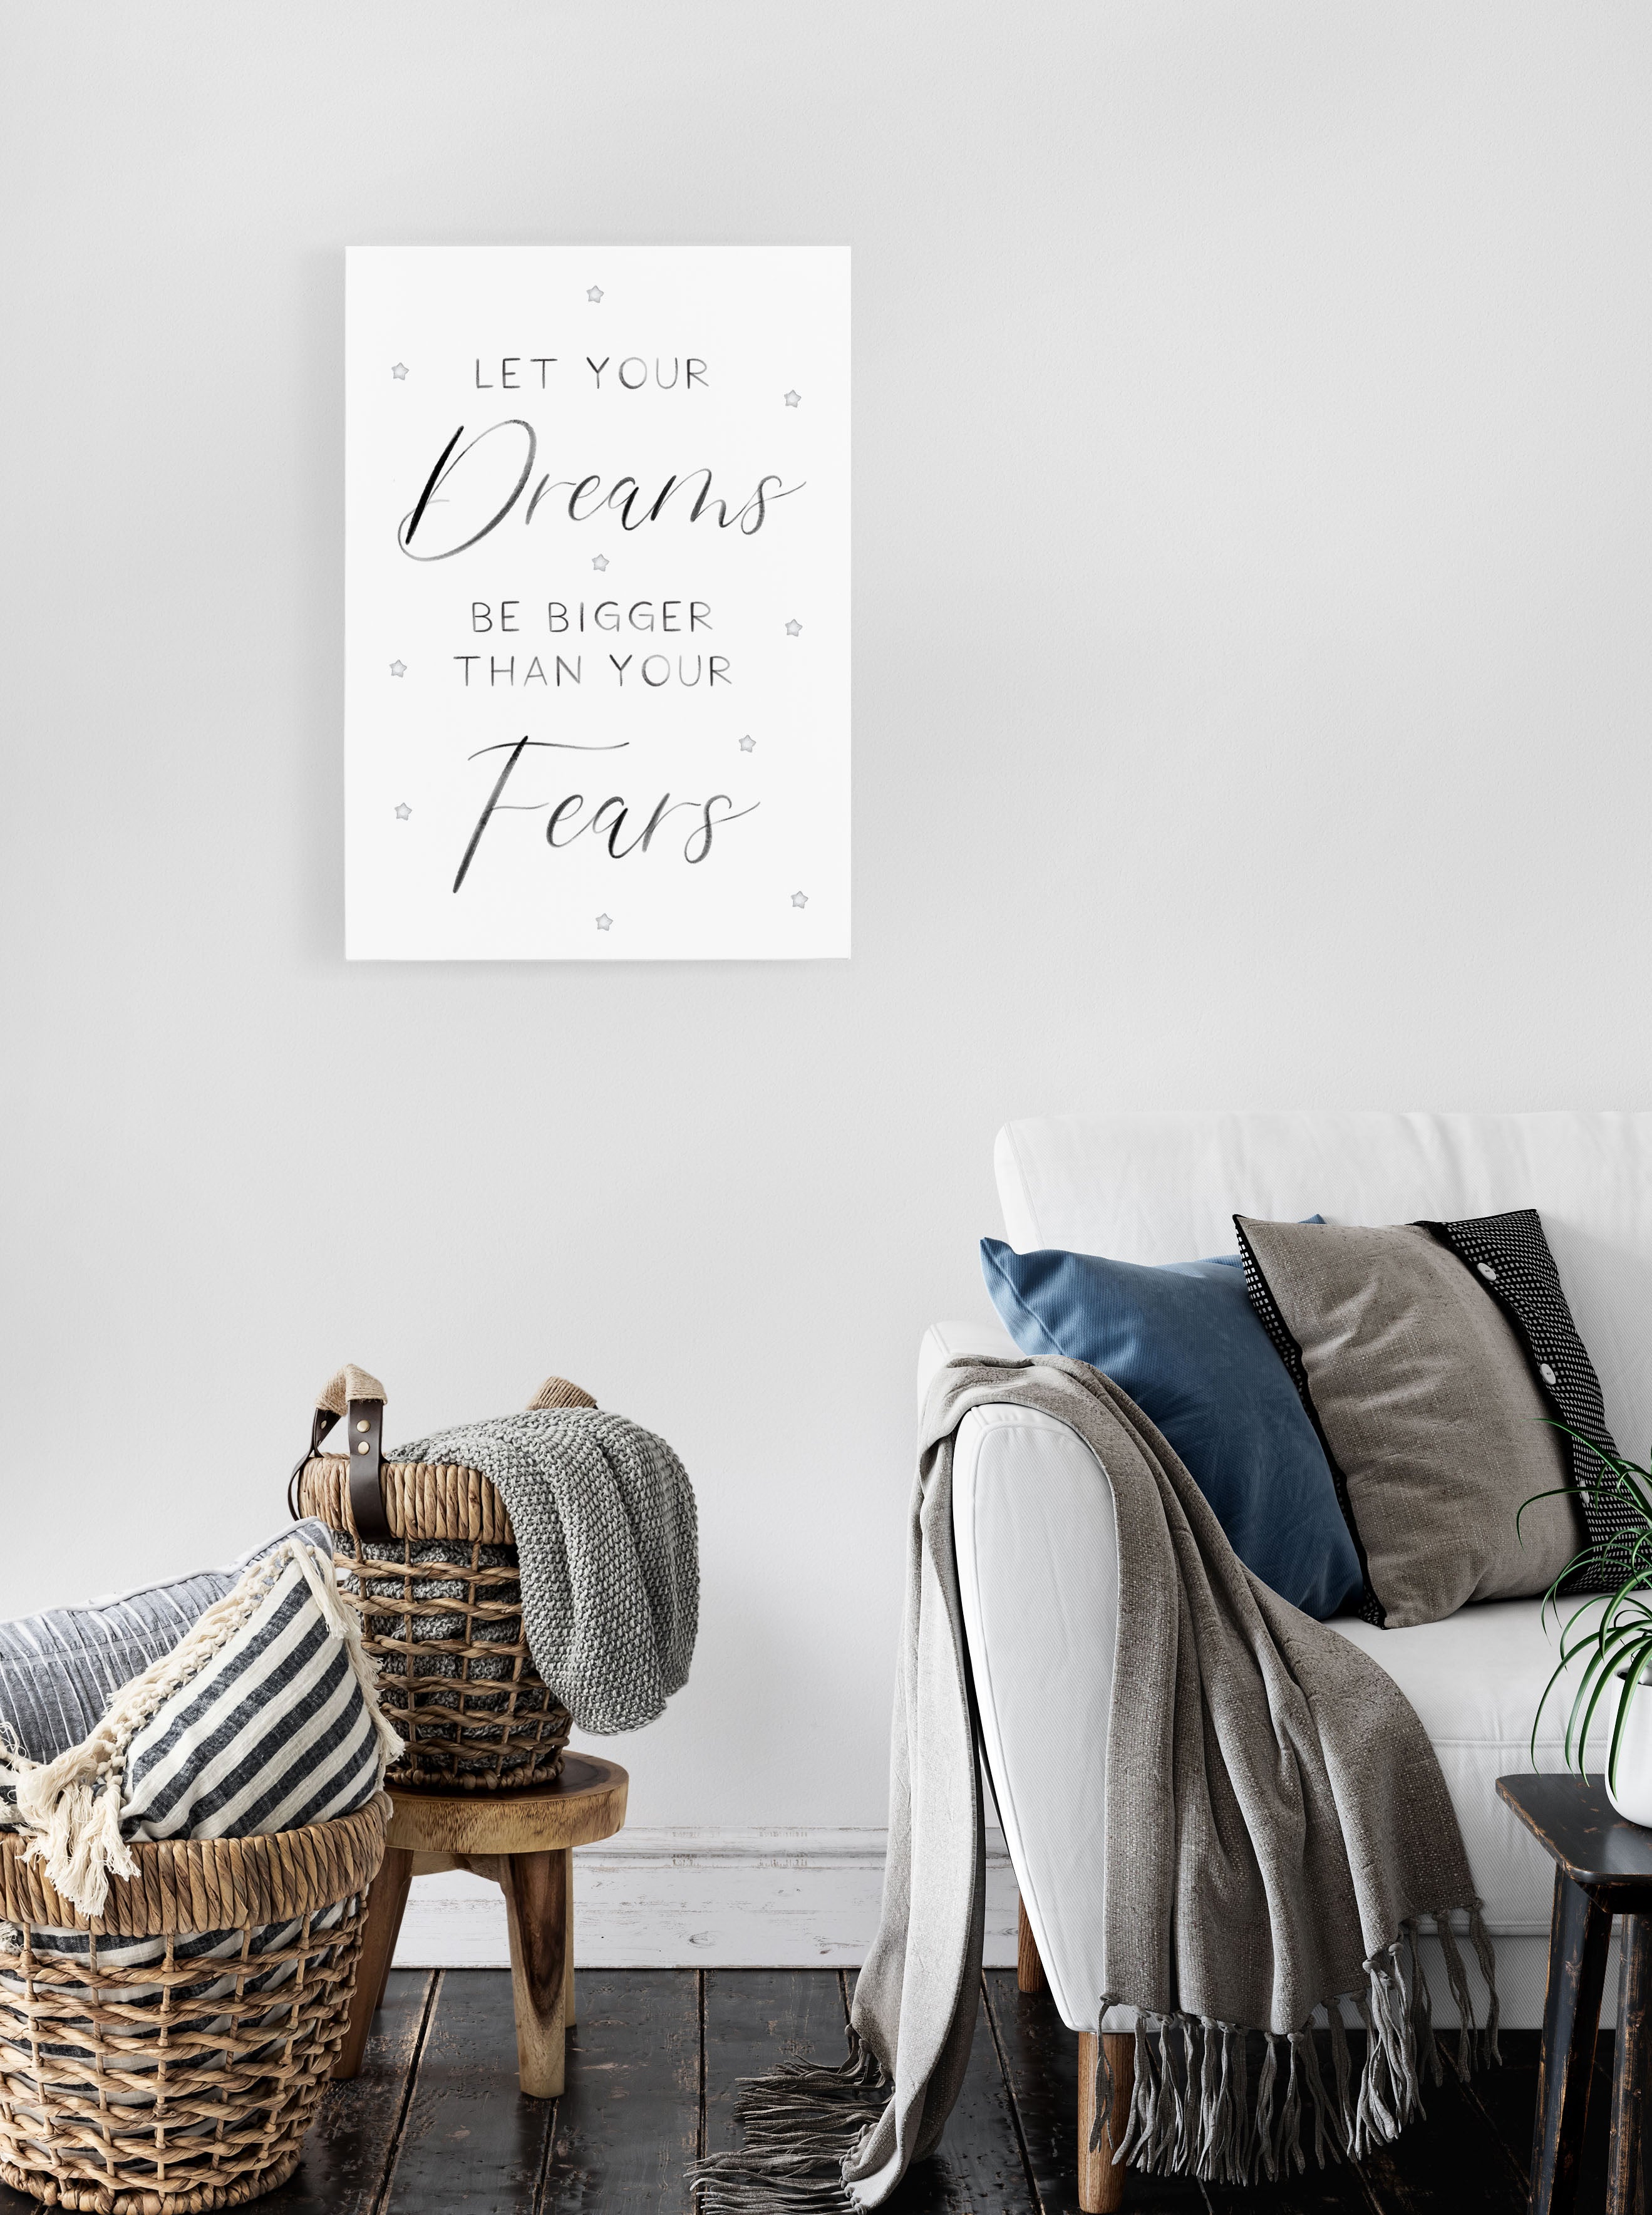 Let Your Dreams Be Bigger Than Your Fears - Canvas Art Wall Decor